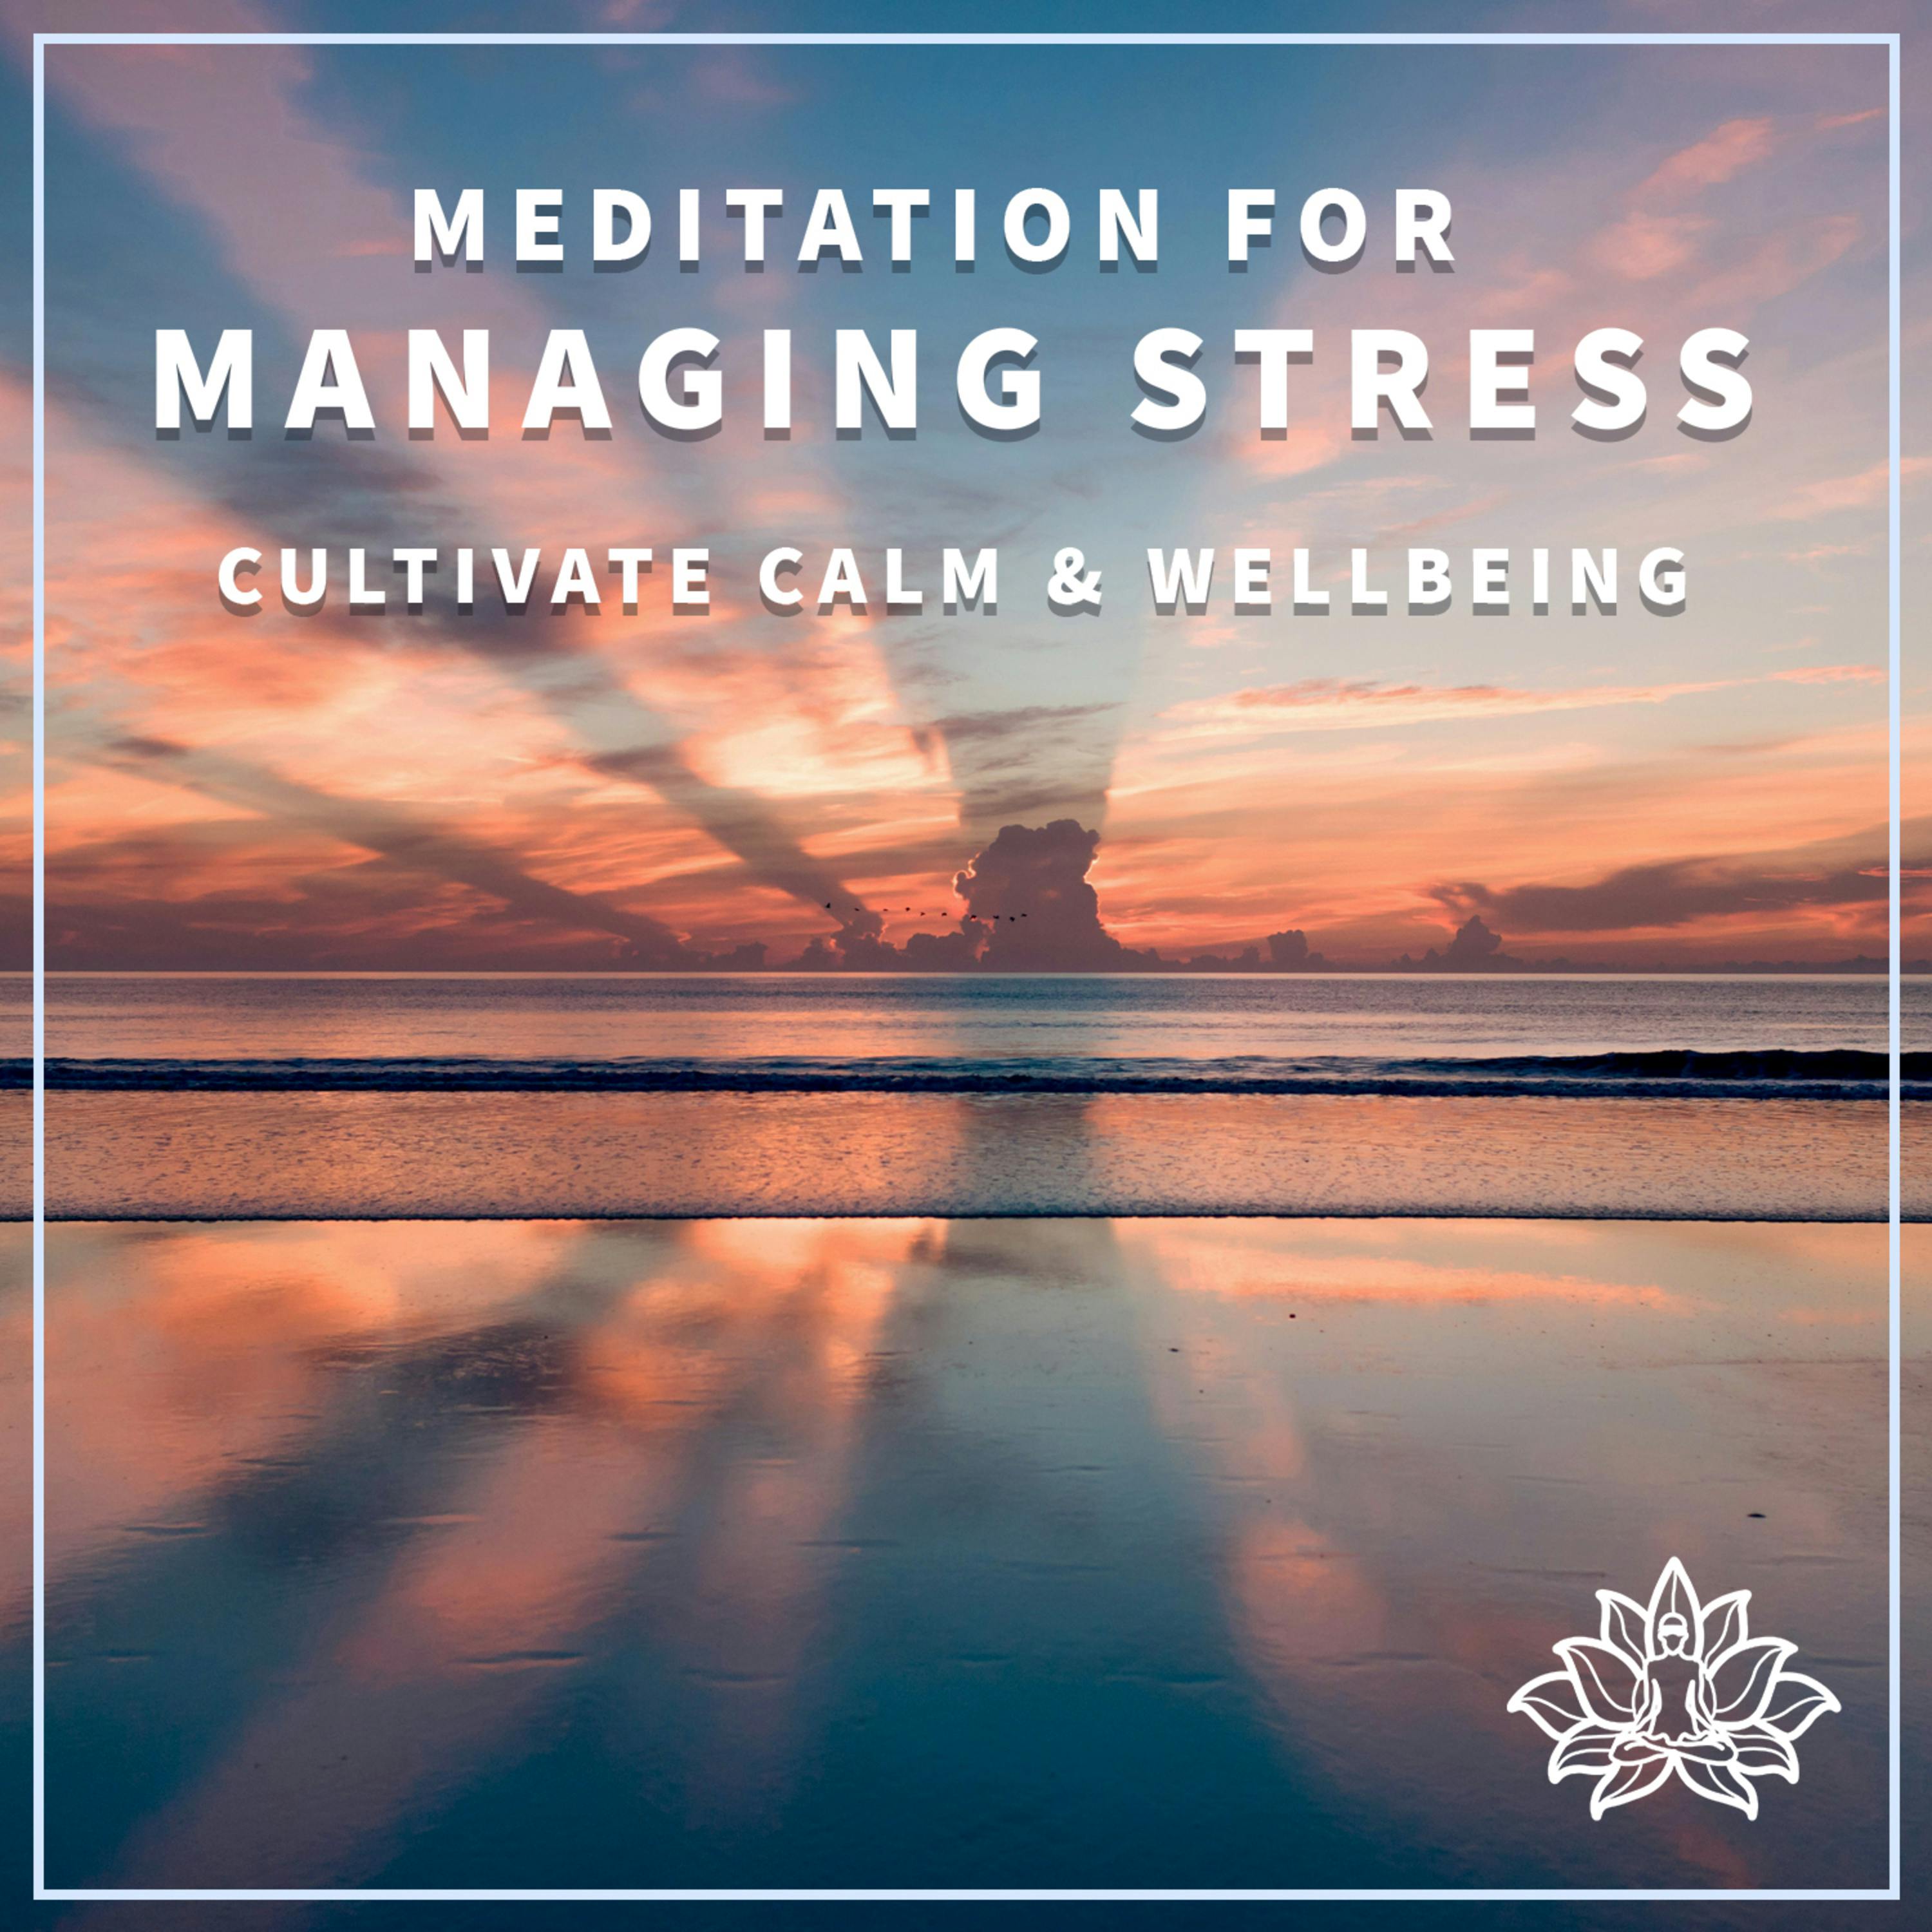 #17 MEDITATION FOR MANAGING STRESS - Cultivate Calm & Wellbeing ✨🙏